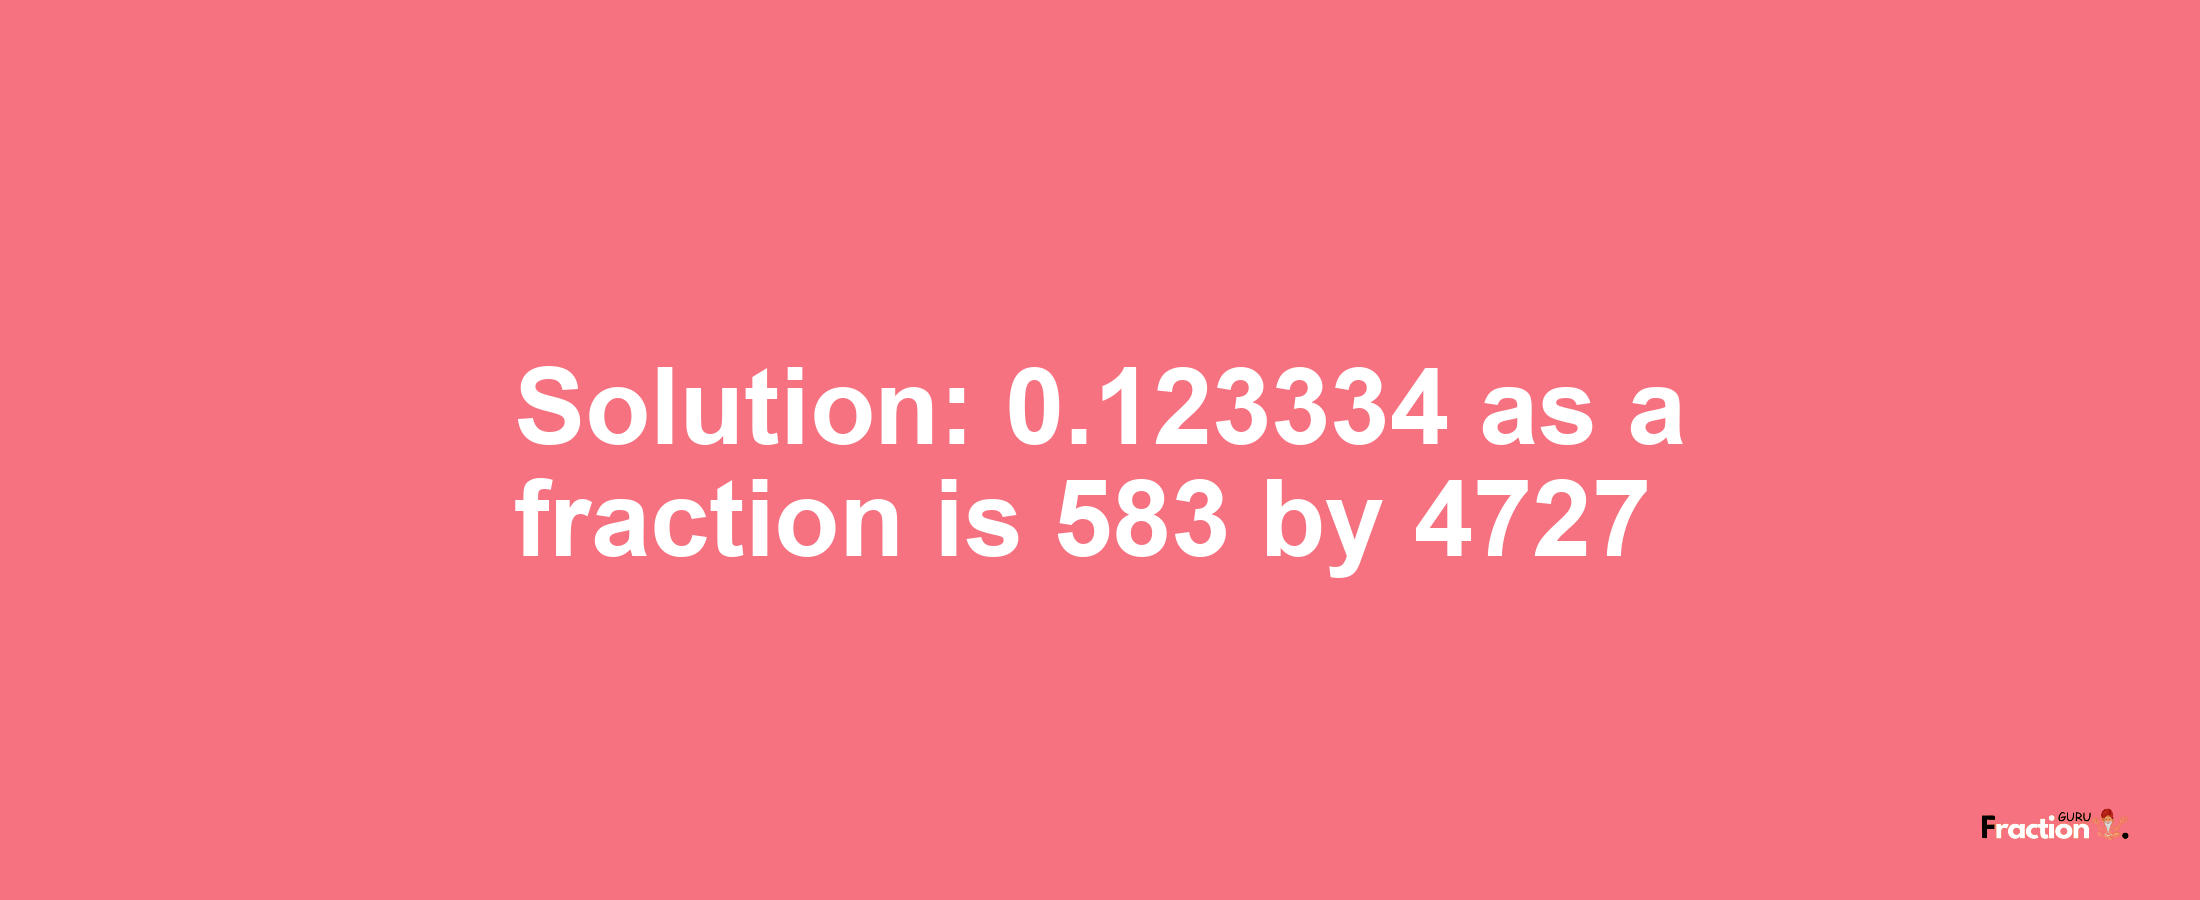 Solution:0.123334 as a fraction is 583/4727